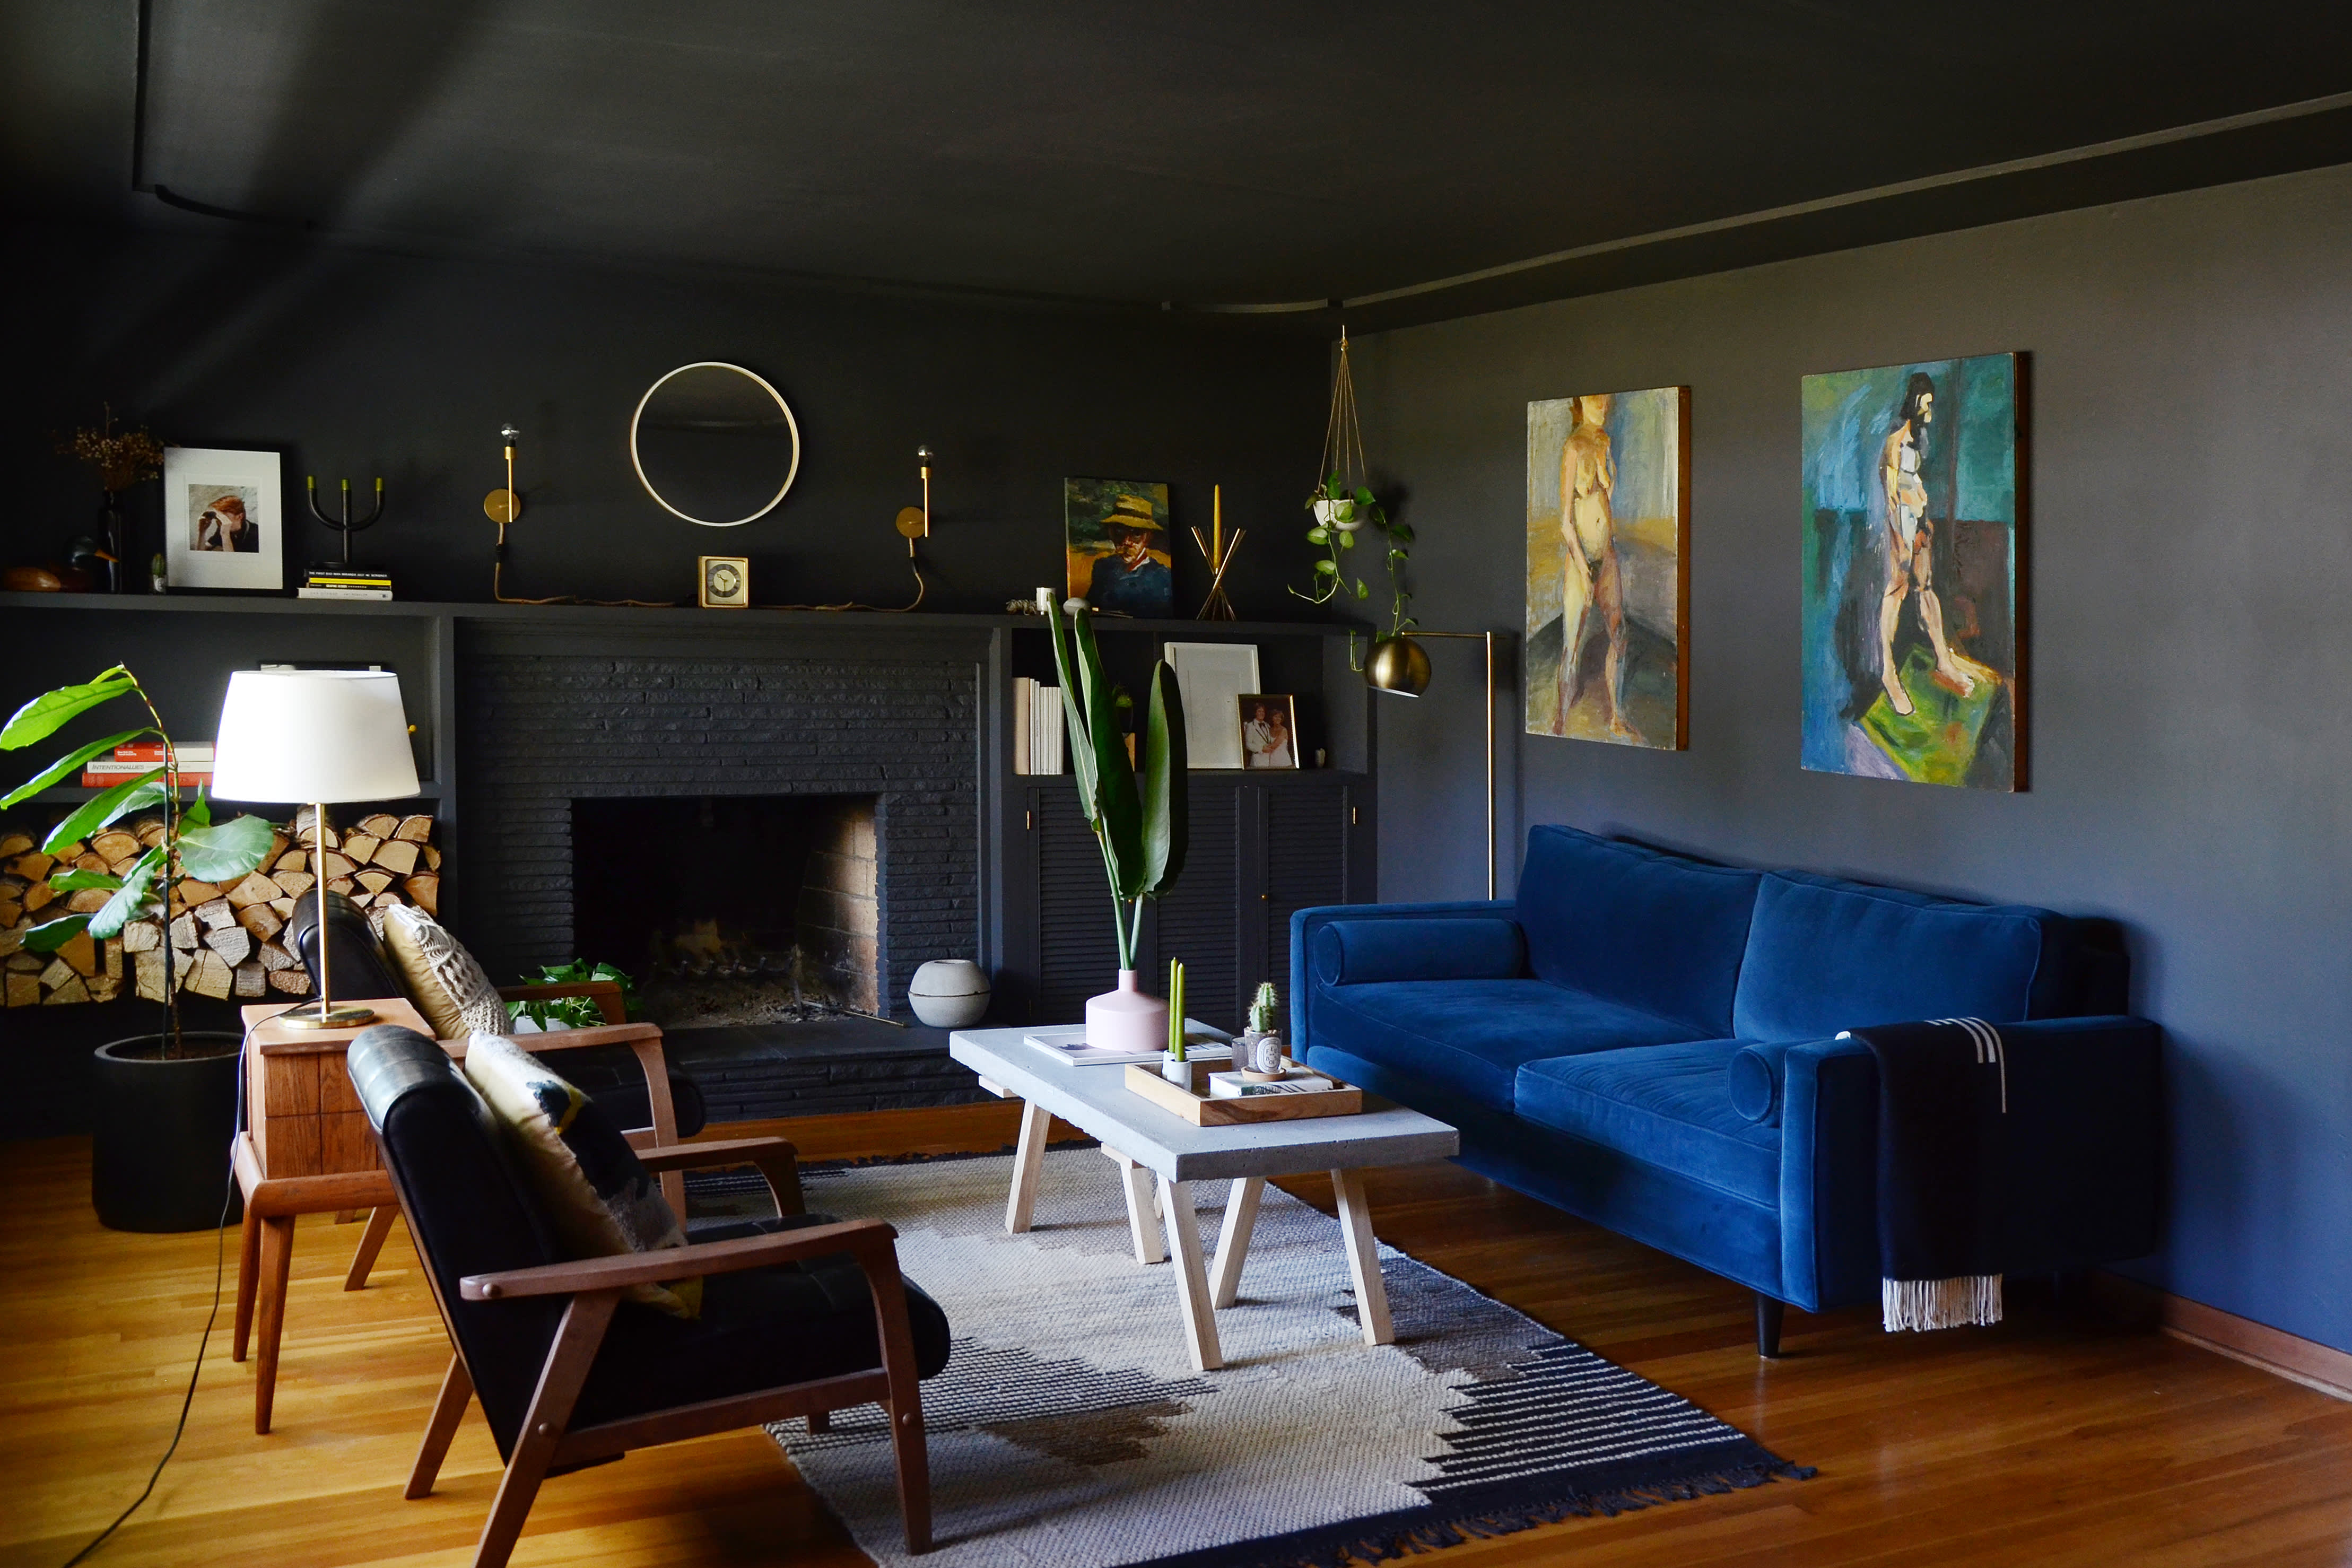 Black living room ideas – 10 inspiring ways to decorate with this dark and dramatic color